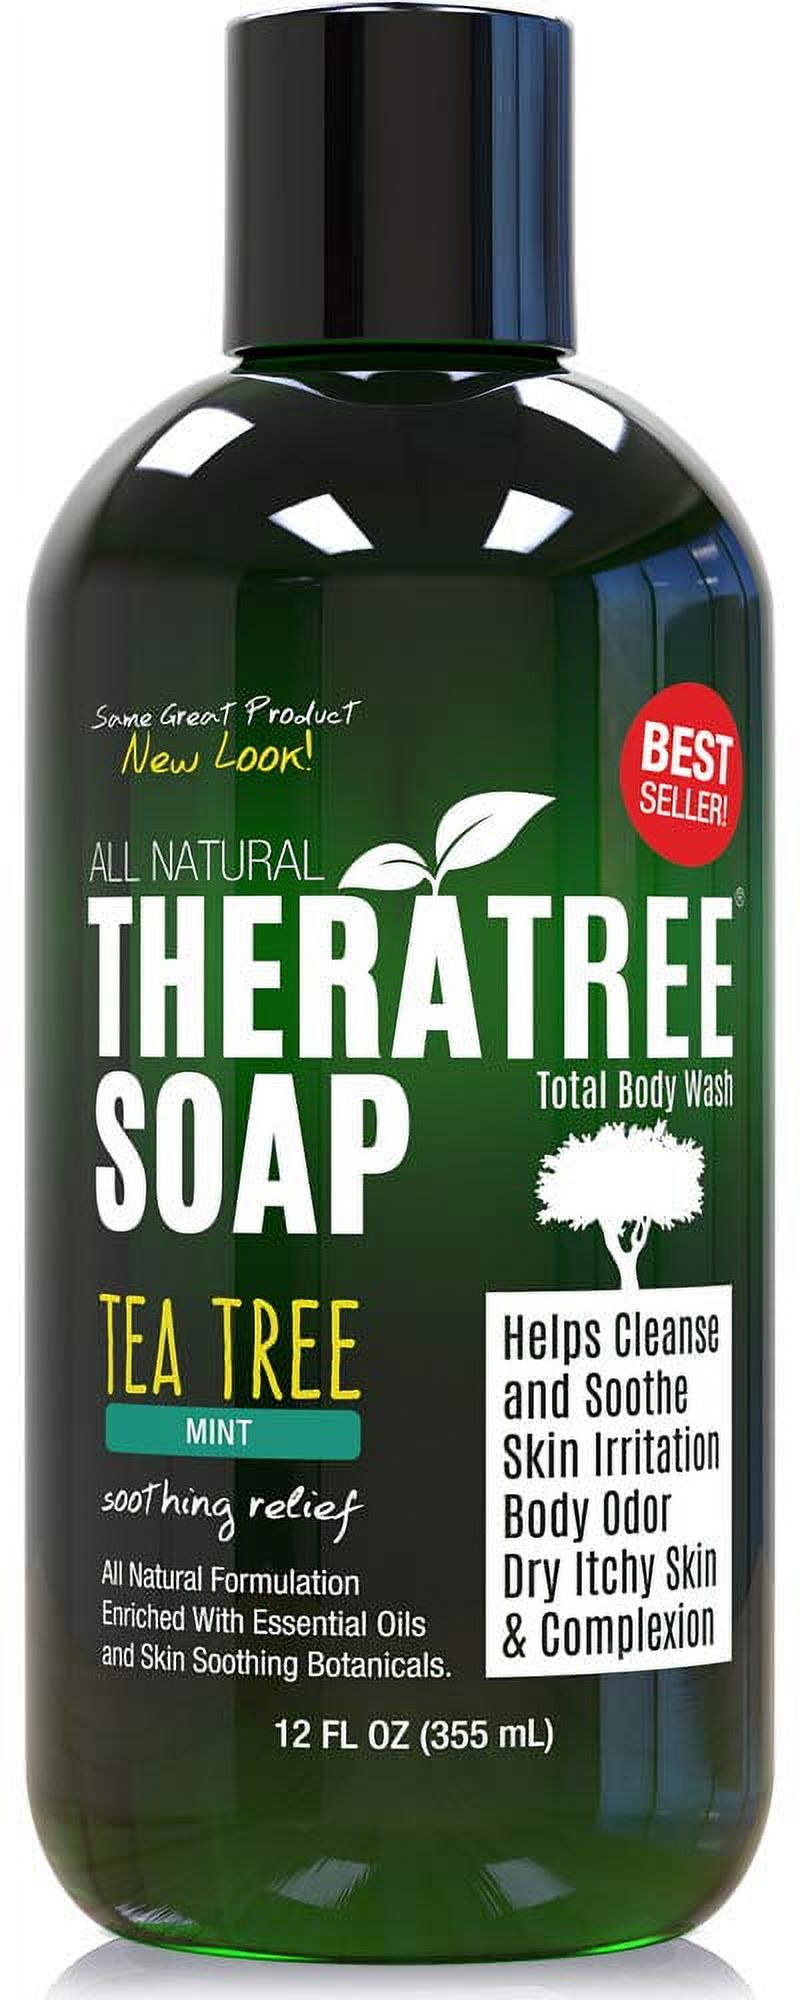 Oleavine TheraTree Tea Tree Oil Soap with Neem Oil - 12oz - Helps Skin Irritation, Body Odor, & Helps Restore Healthy Complexion for Body and Face TheraTree - image 1 of 5